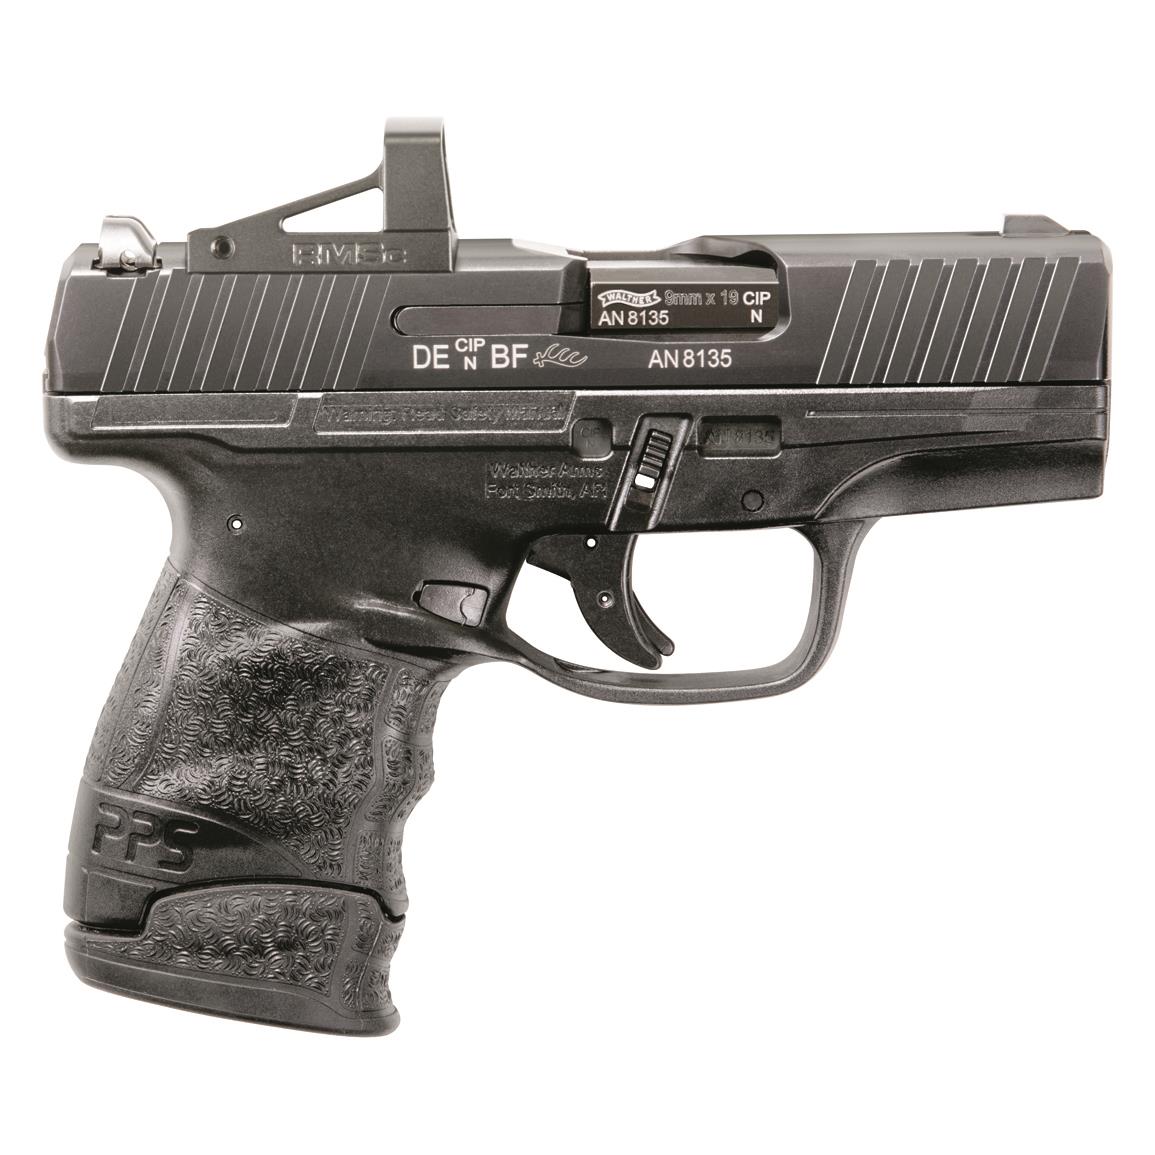 Walther PPS M2 with Shield RMSC Optic, Semi-Automatic, 9mm, 3.18" Barrel, 7+1 Rounds